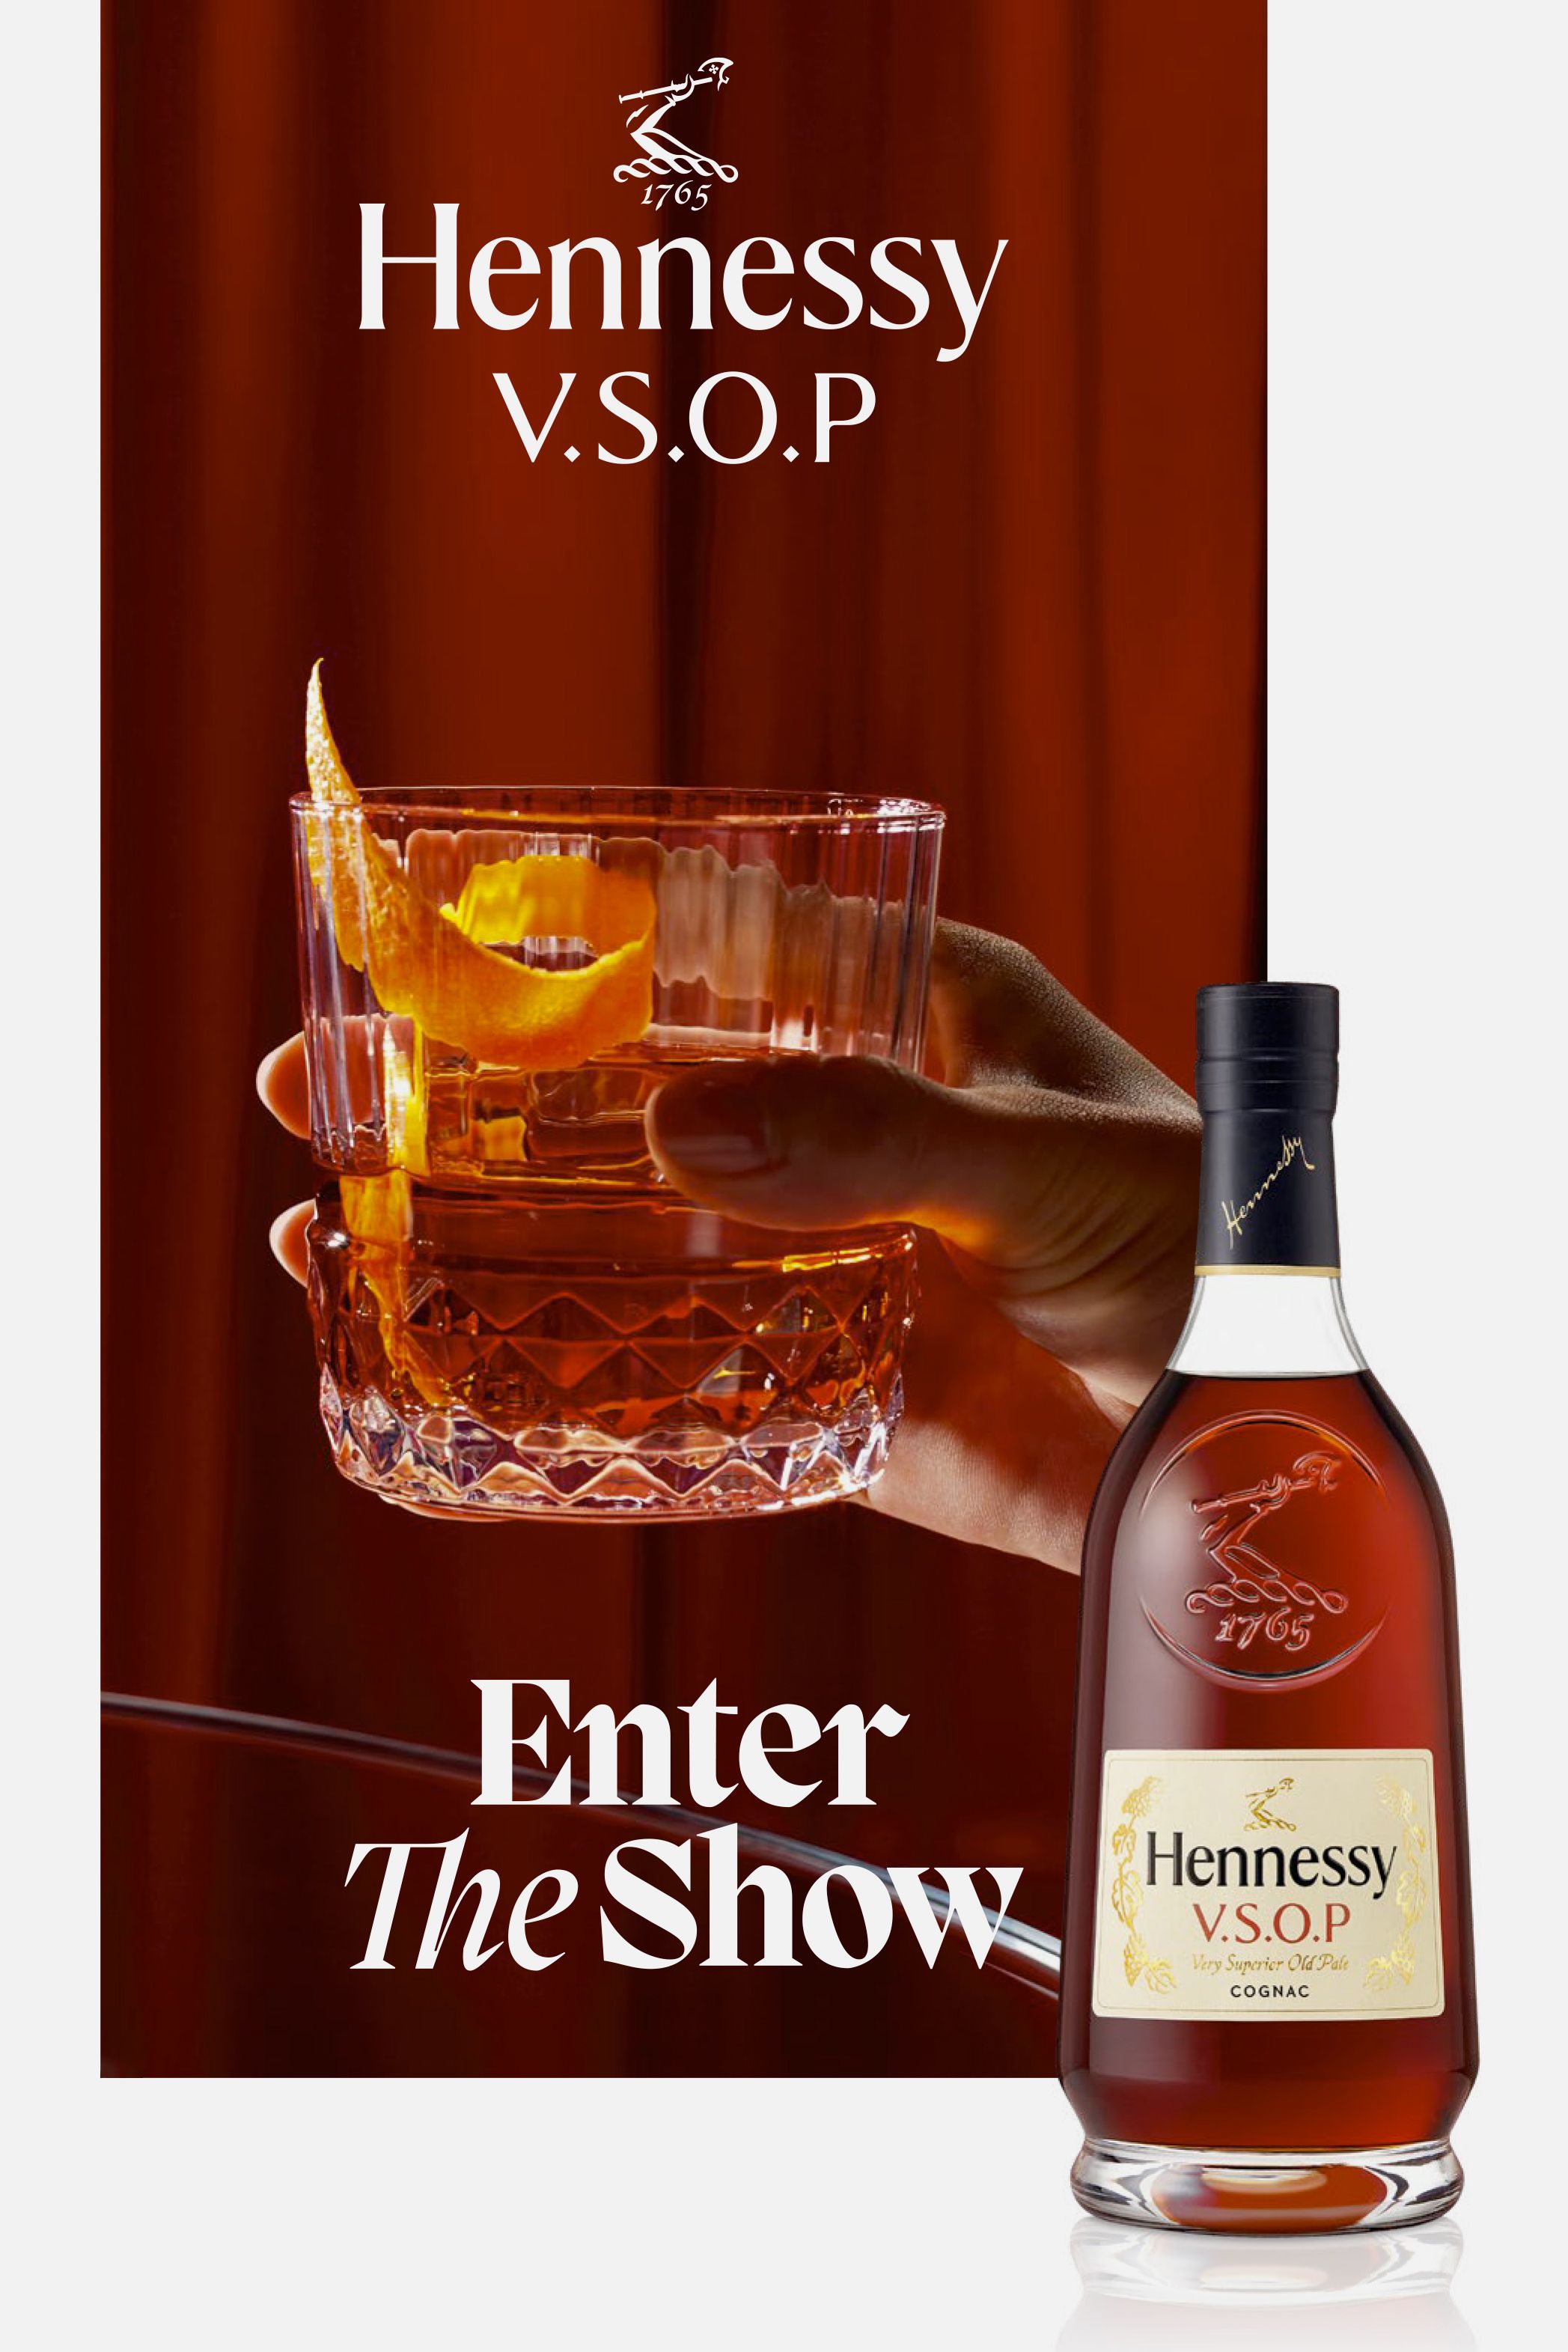 Hennessy VSOP campaign